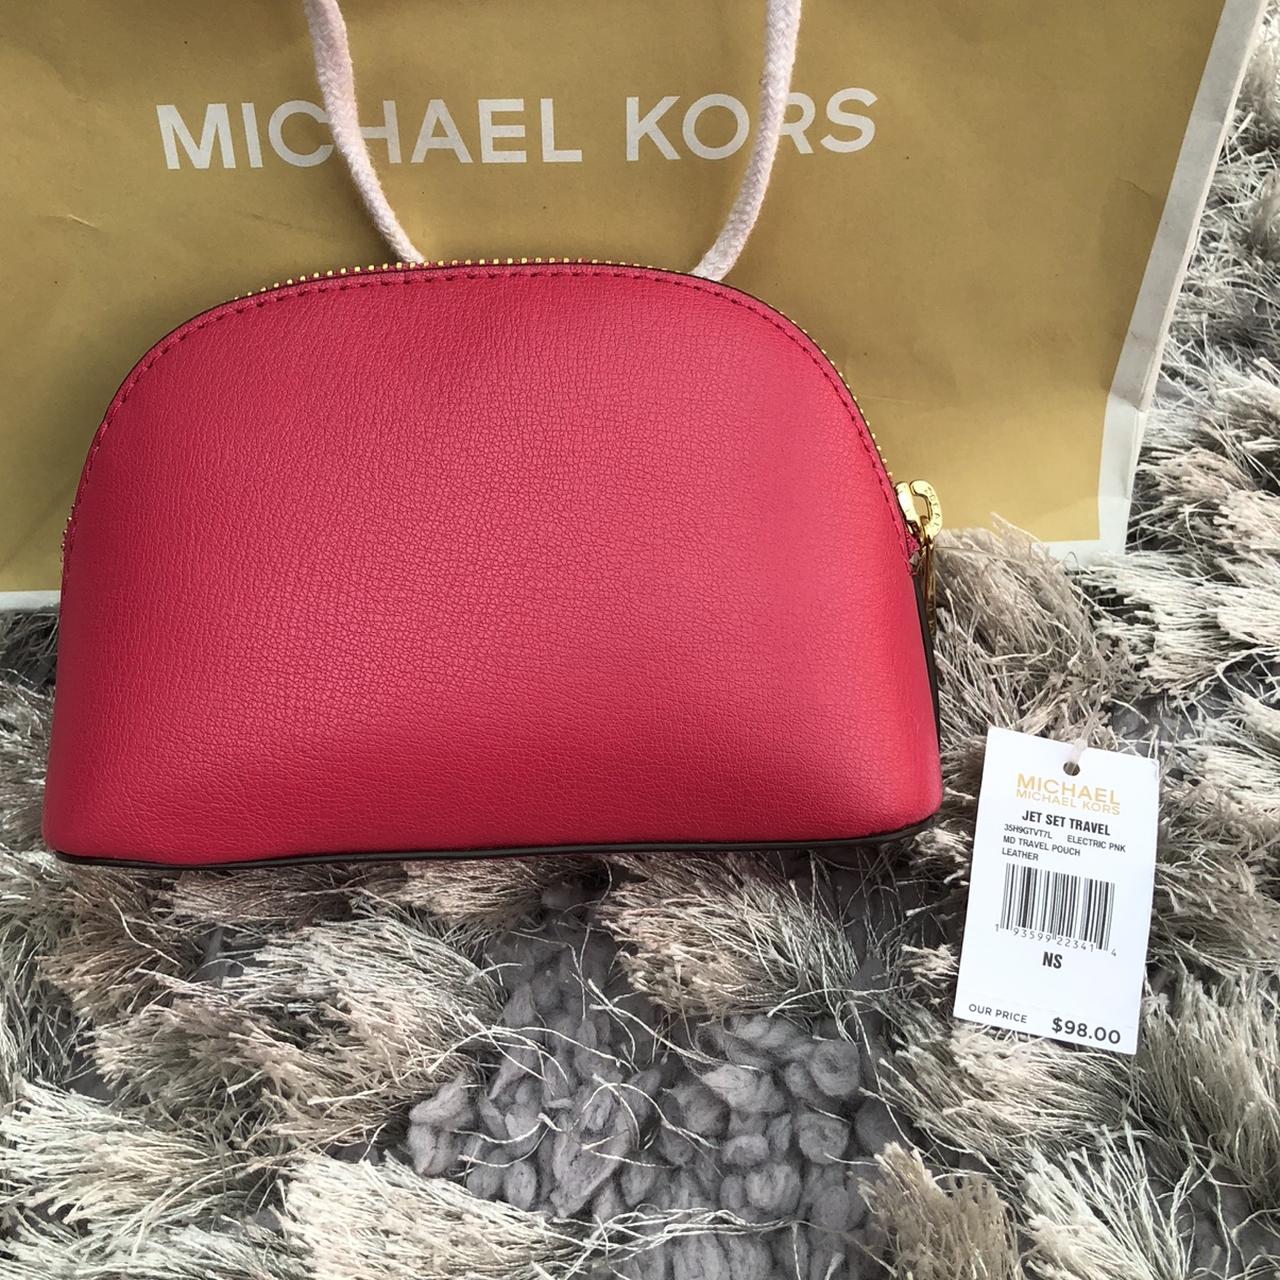 Brand new Jet set travel tote bag from Micheal kors - Depop